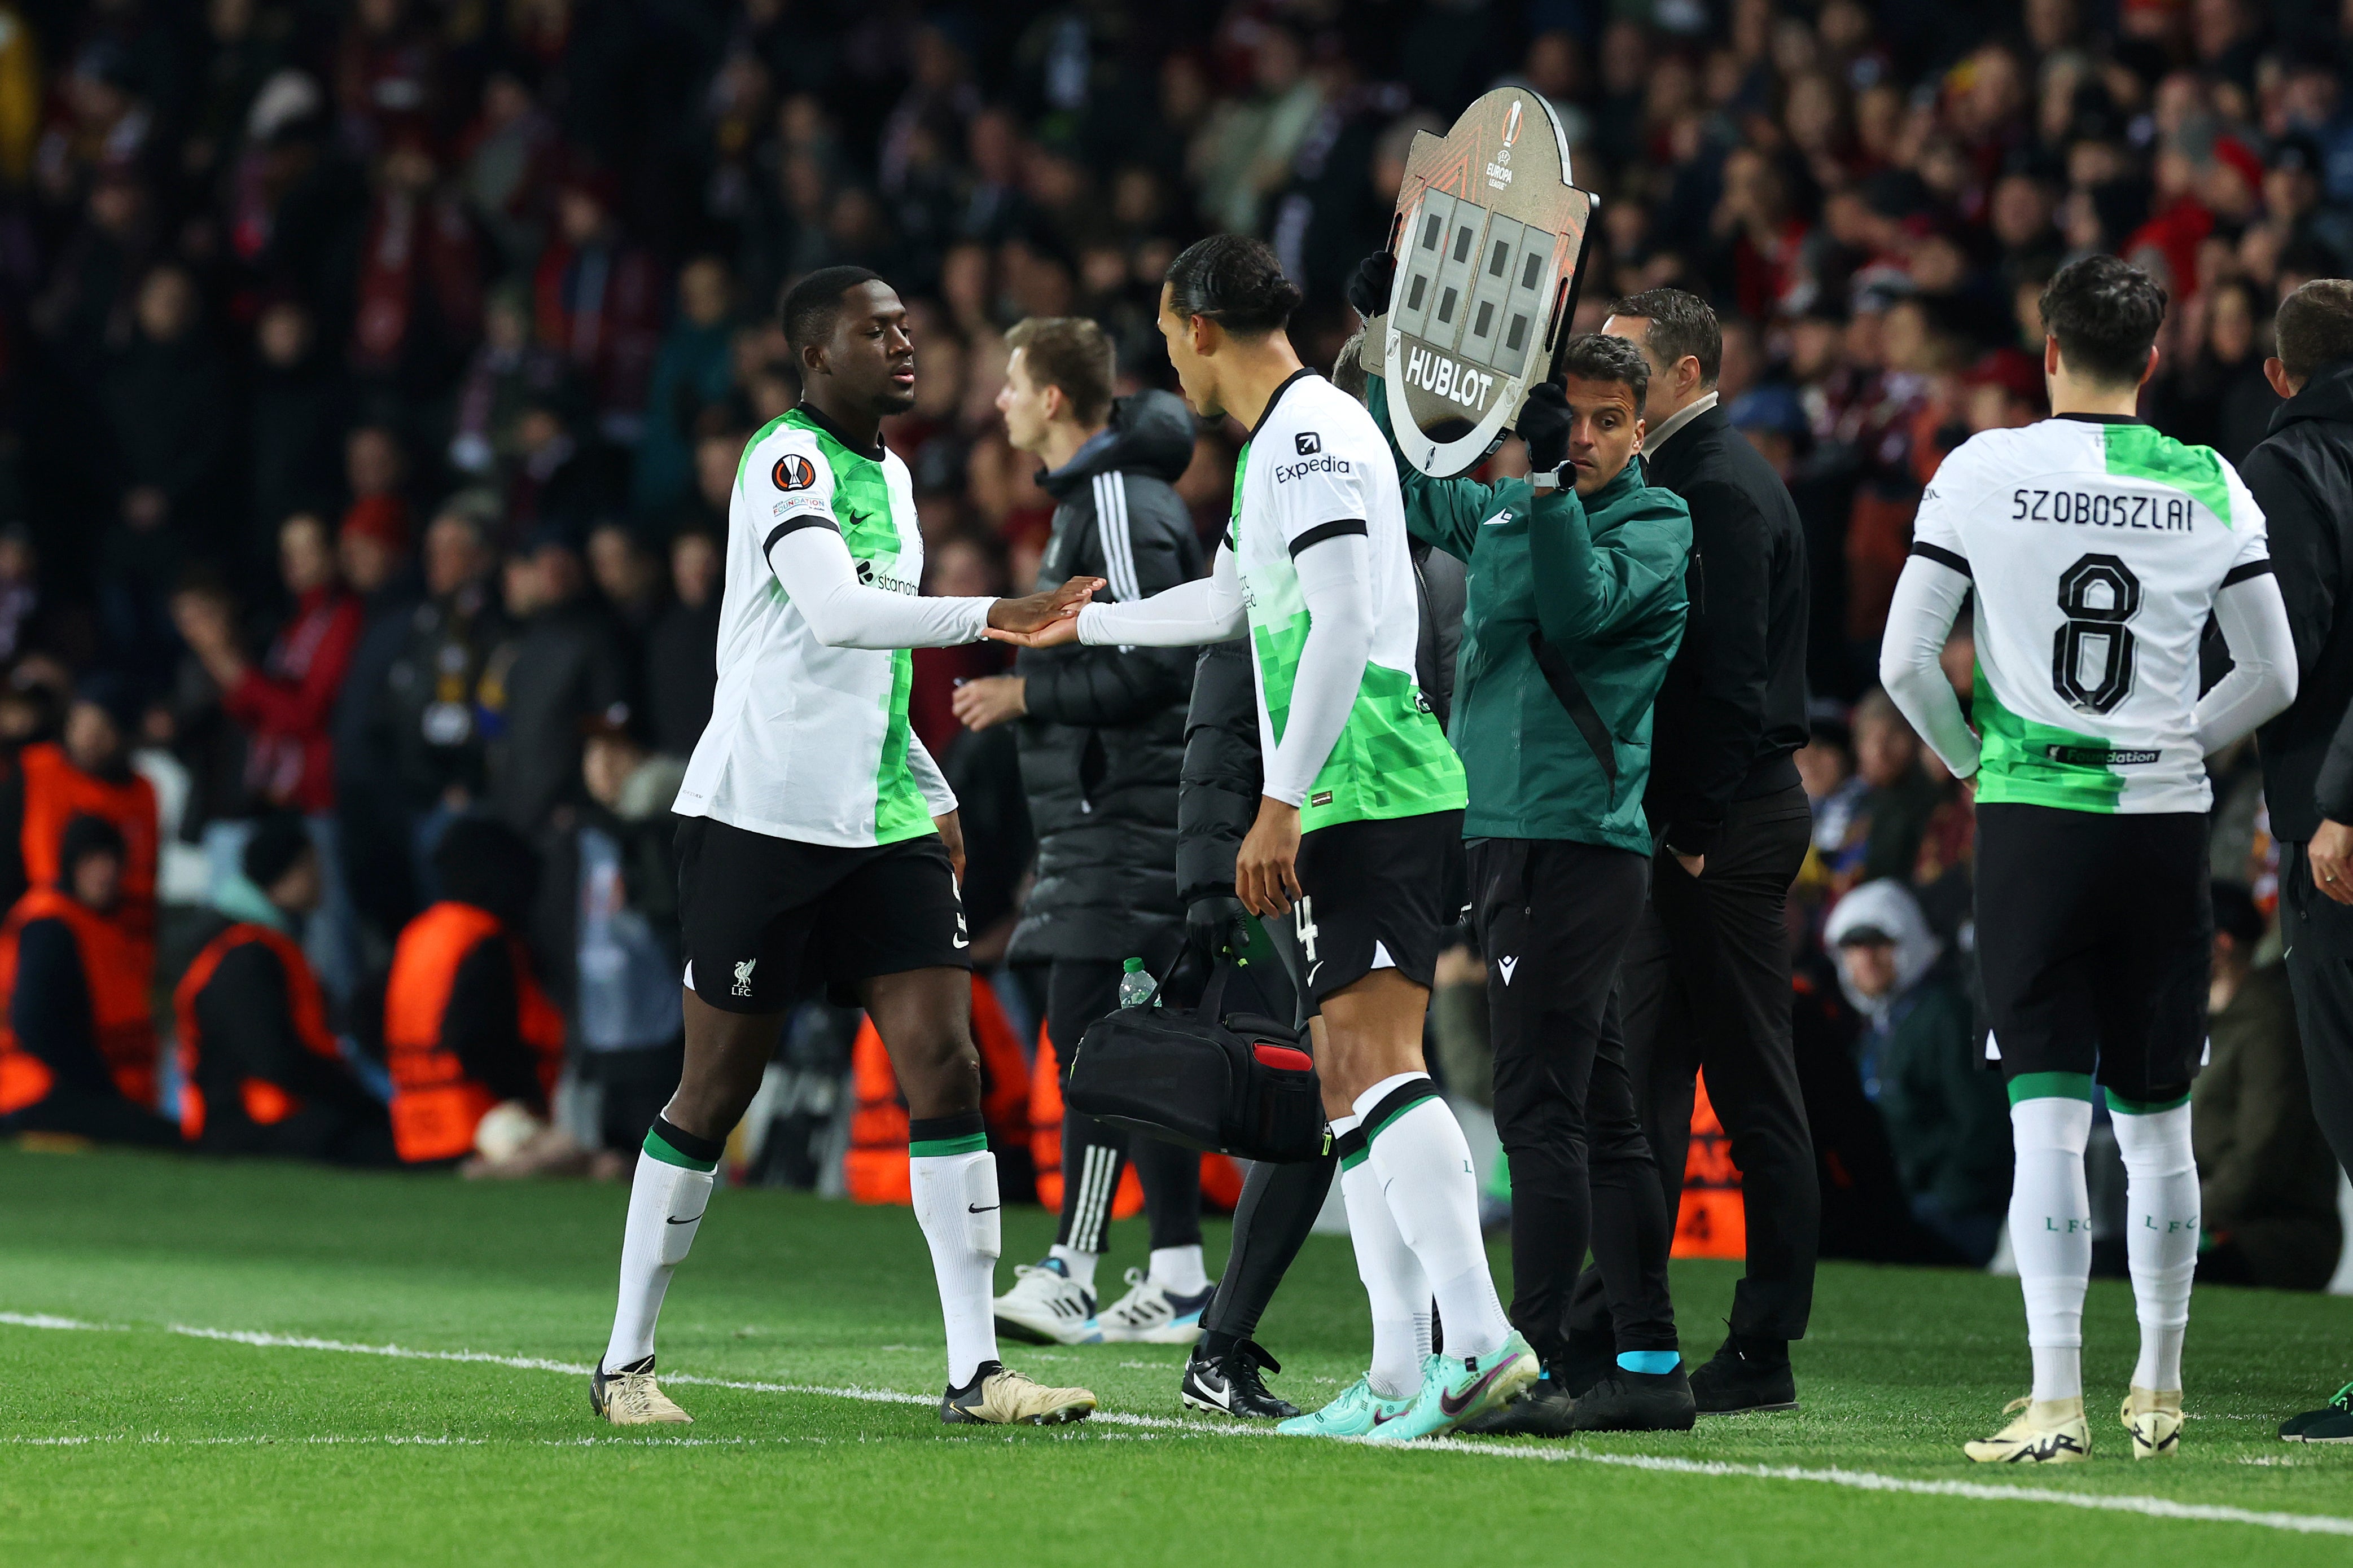 Ibrahima Konate had to be subbed off after a knock which adds to Liverpool’s injury crisis